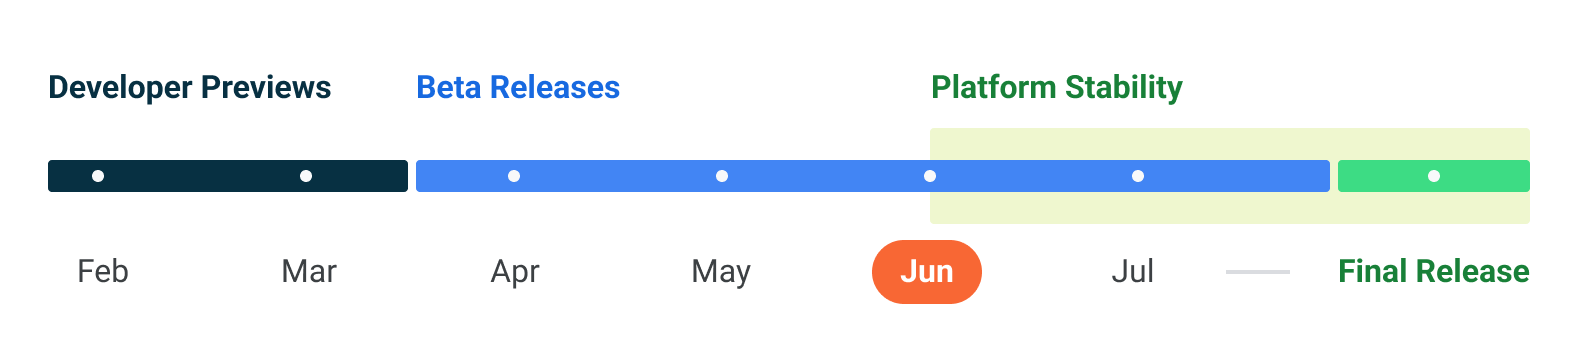 Timeline graph, showing June and July as "Platform stability", with a final release after that